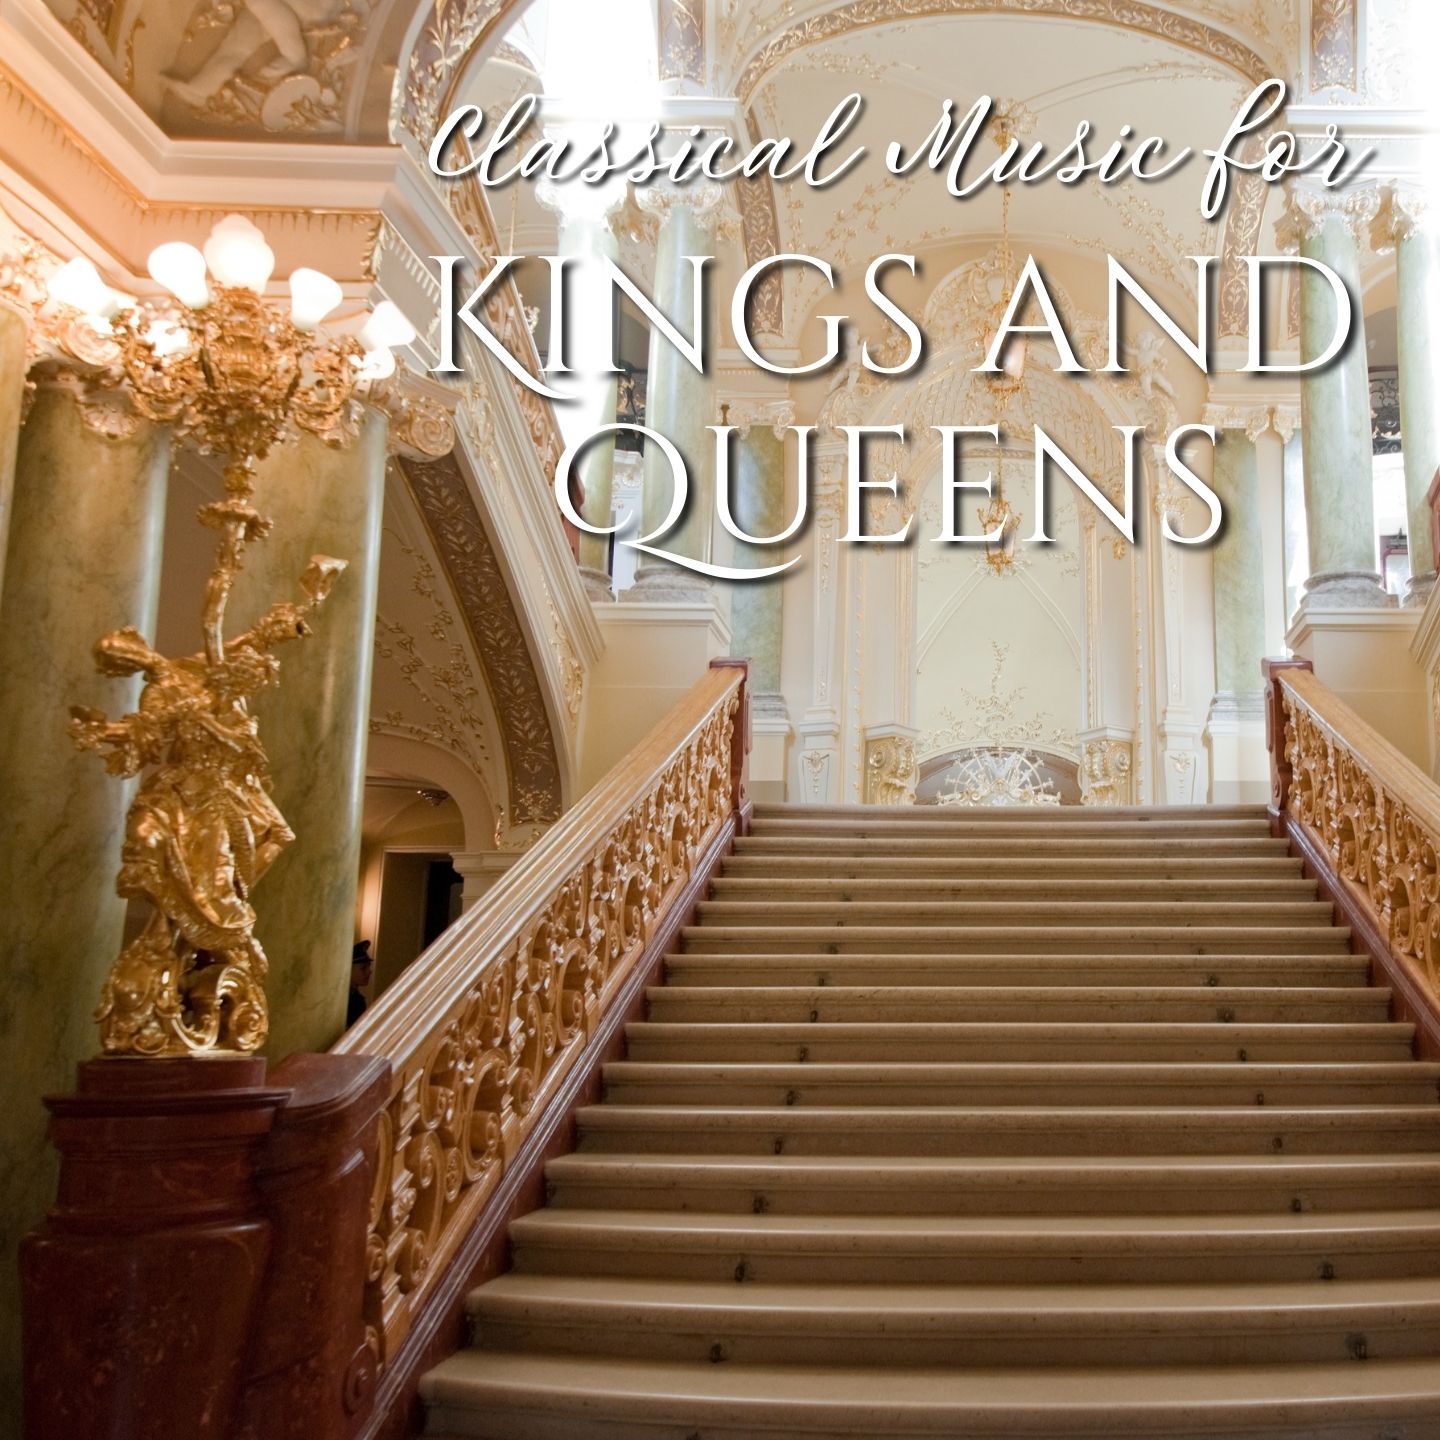 Classical Music for Kings and Queens